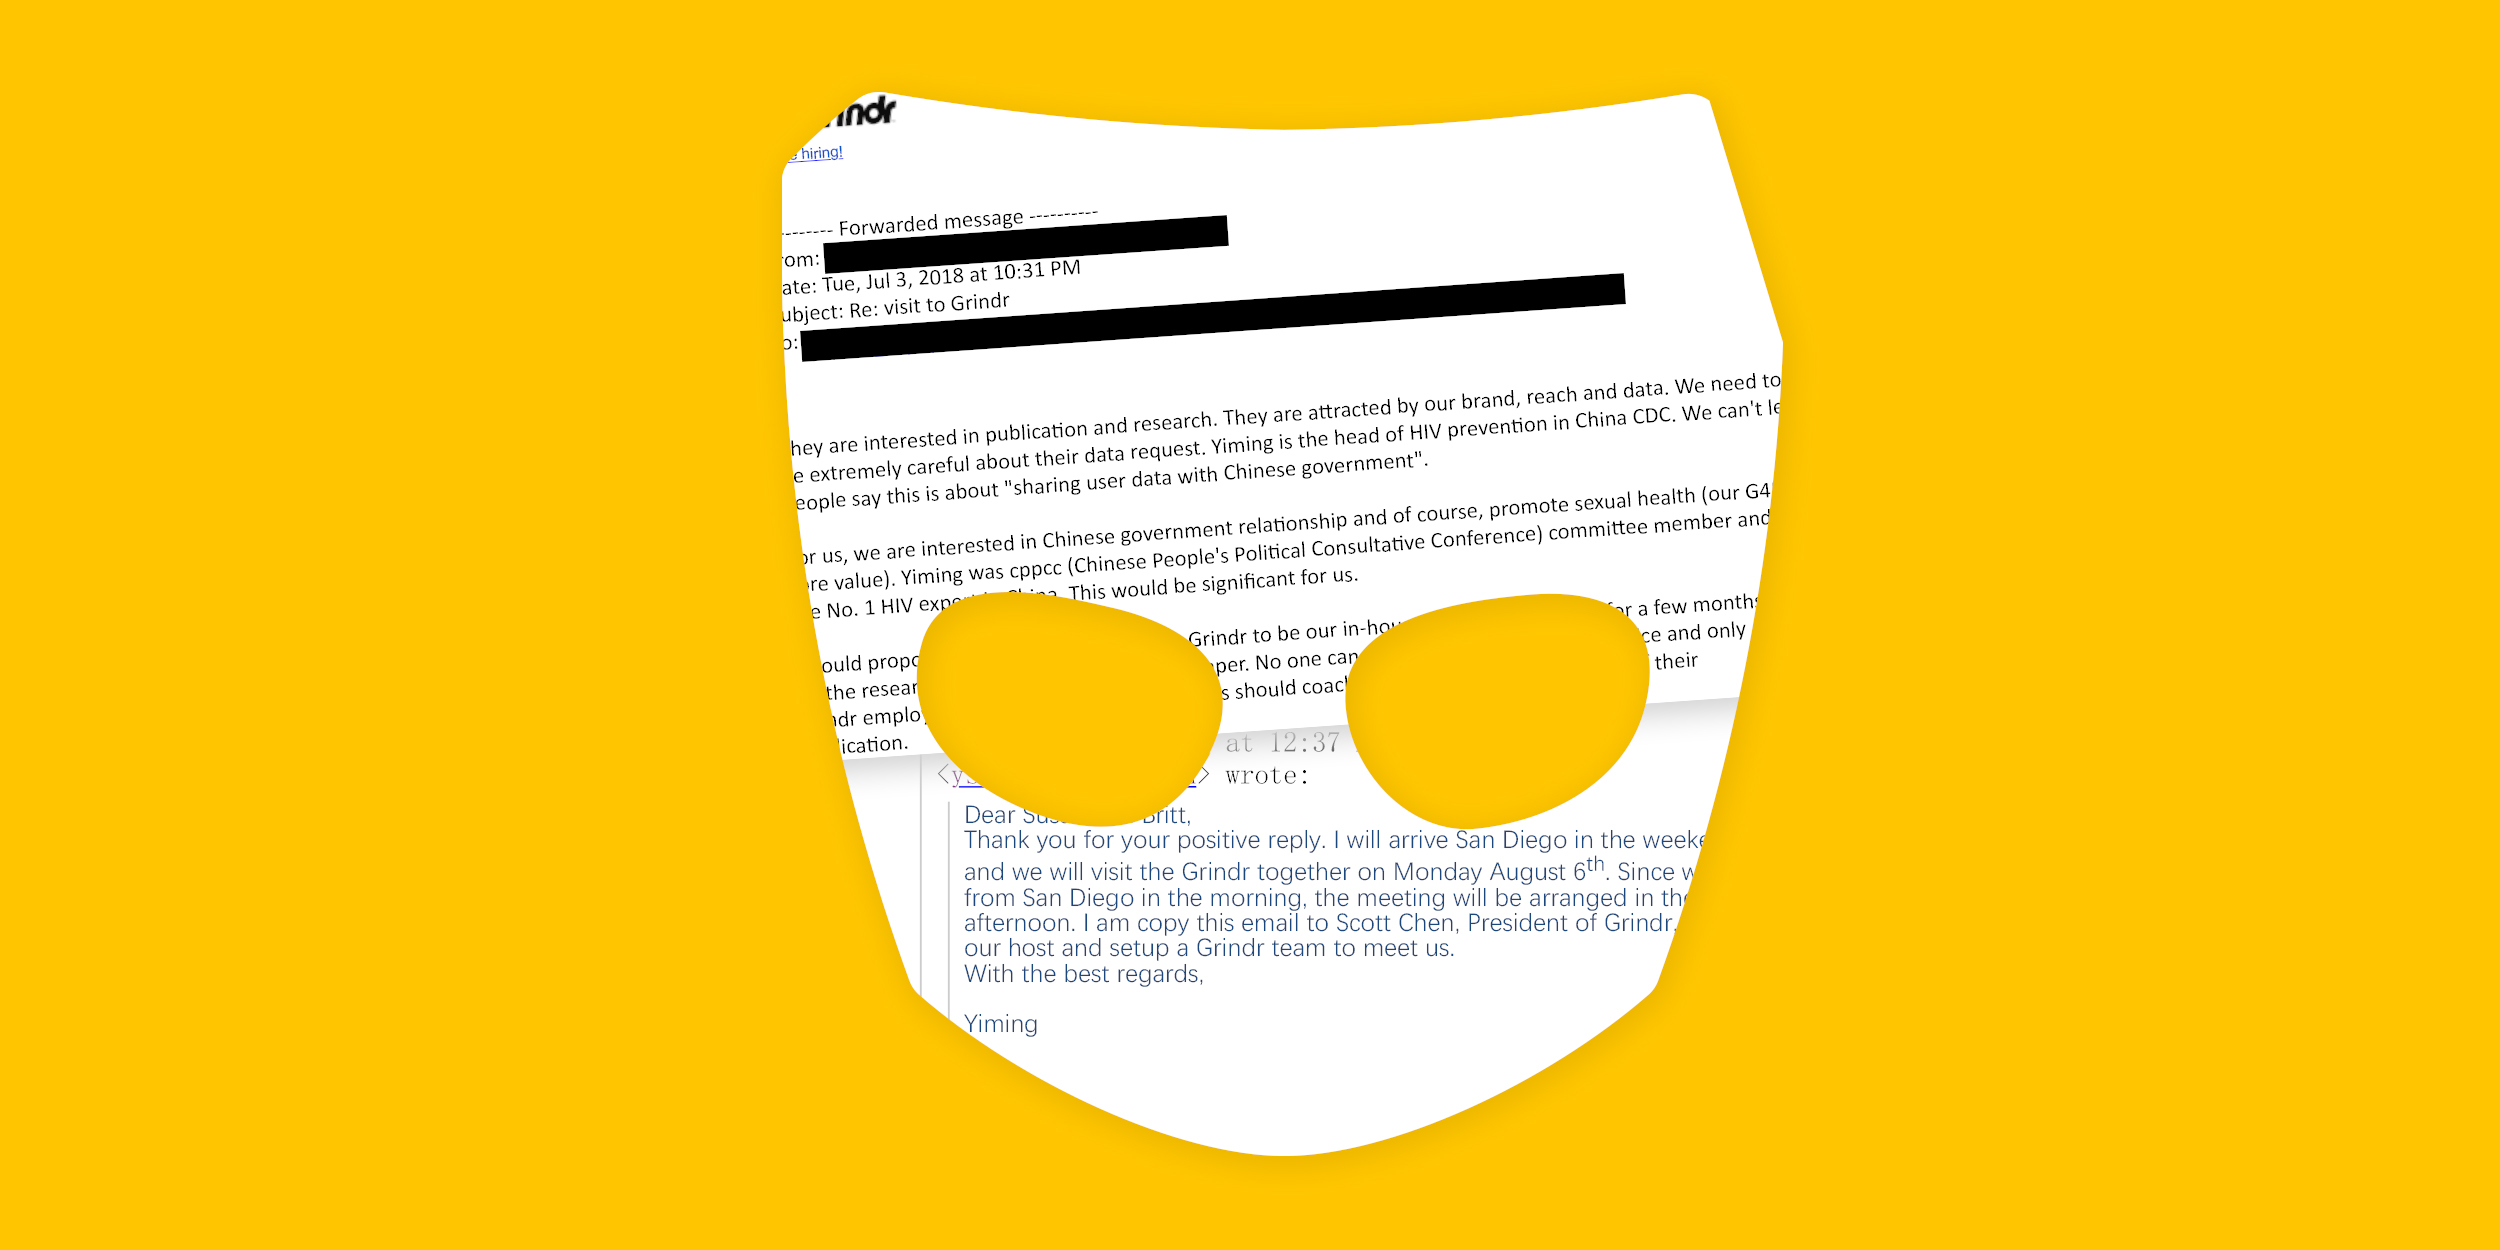 Grindr emails reveal concern that China wanted to access user data